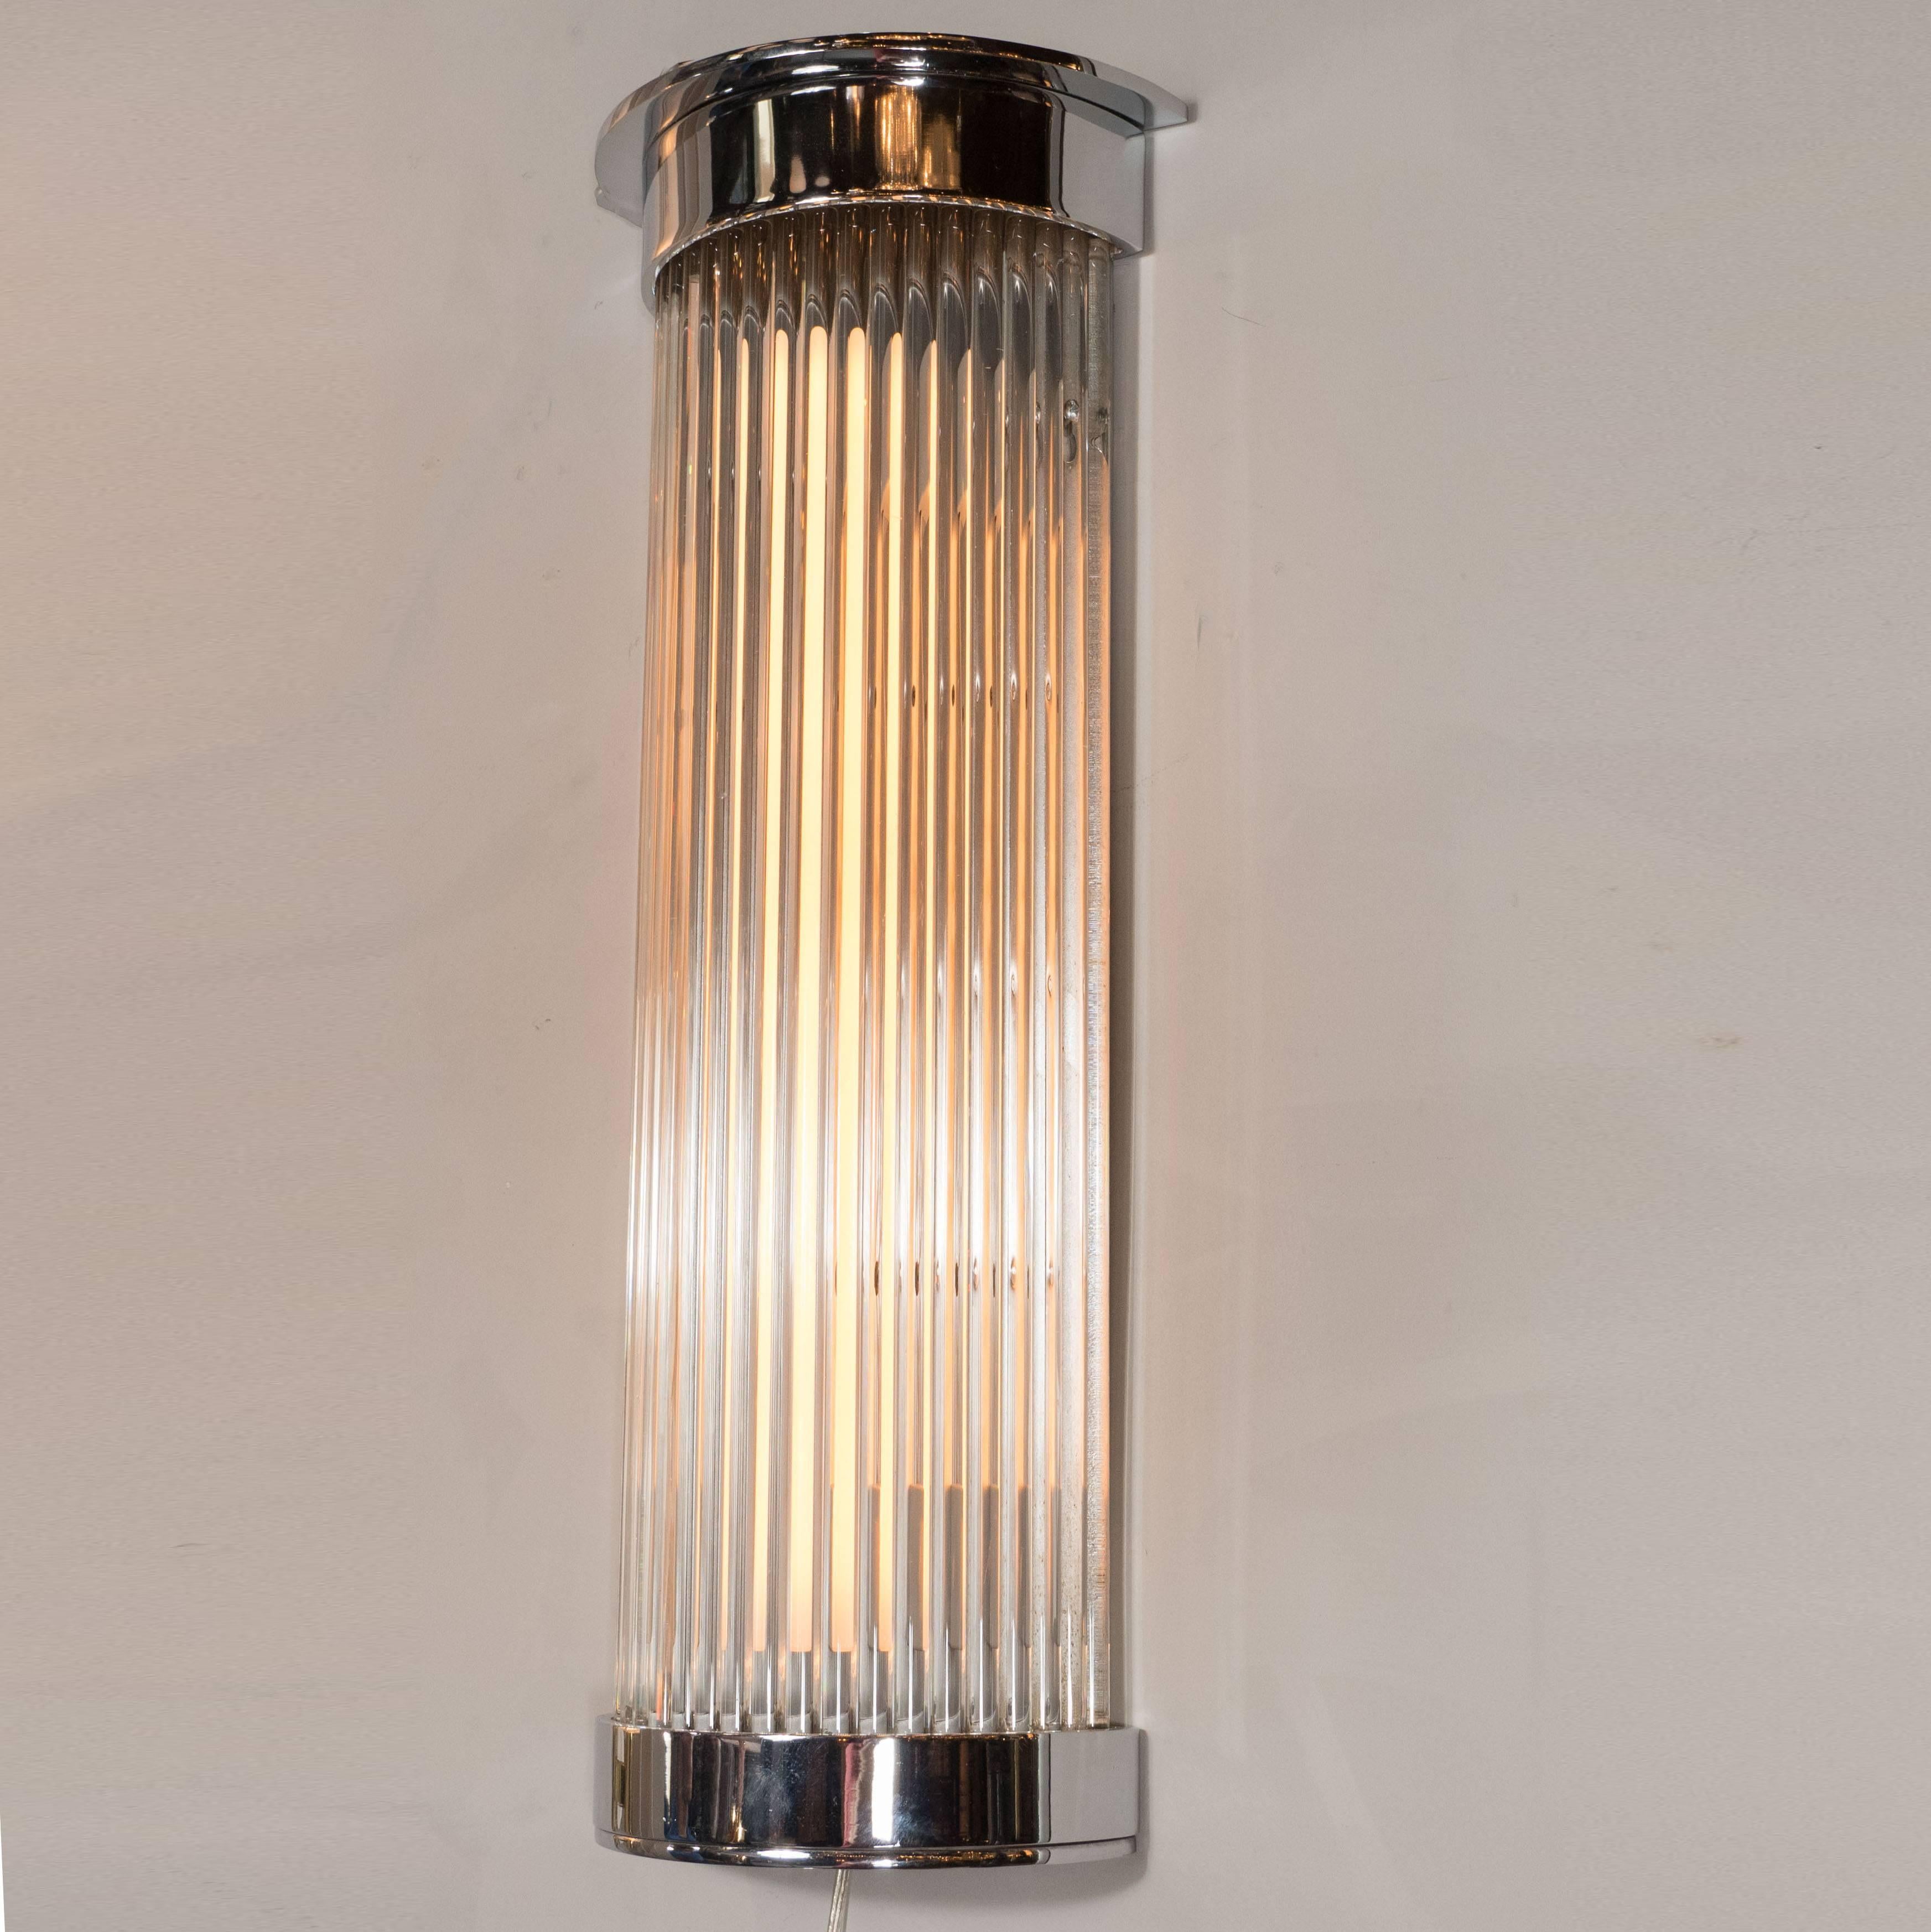 Originally used in the legendary Sunset tower hotel in Los Angeles- formerly the home to Errol Flynn, Marilyn Monroe and Frank Sinatra- this stunning of Art Deco sconce embodies the old world elegance of 1930s Hollywood. It features demilune shaped